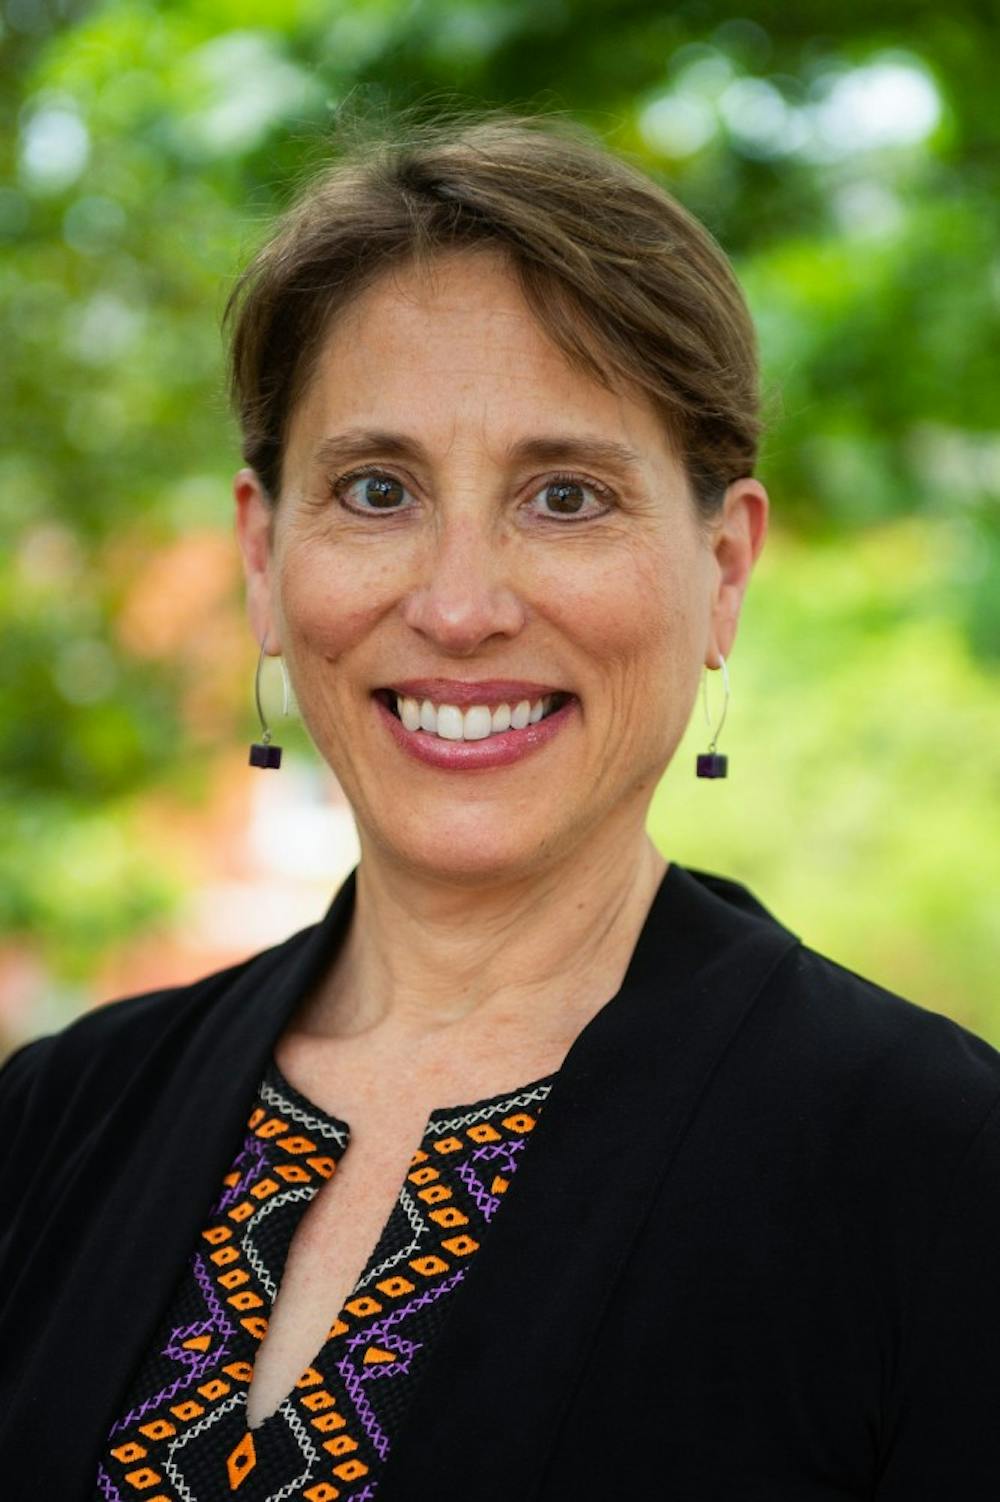 <p>Jennifer Kerpelman, professor and associate dean for research, graduate studies and outreach in the College of Human Sciences, has been named Auburn University’s interim vice president for research, effective June 1. Contributed by the Auburn University Office of Communications and Marketing.&nbsp;</p>